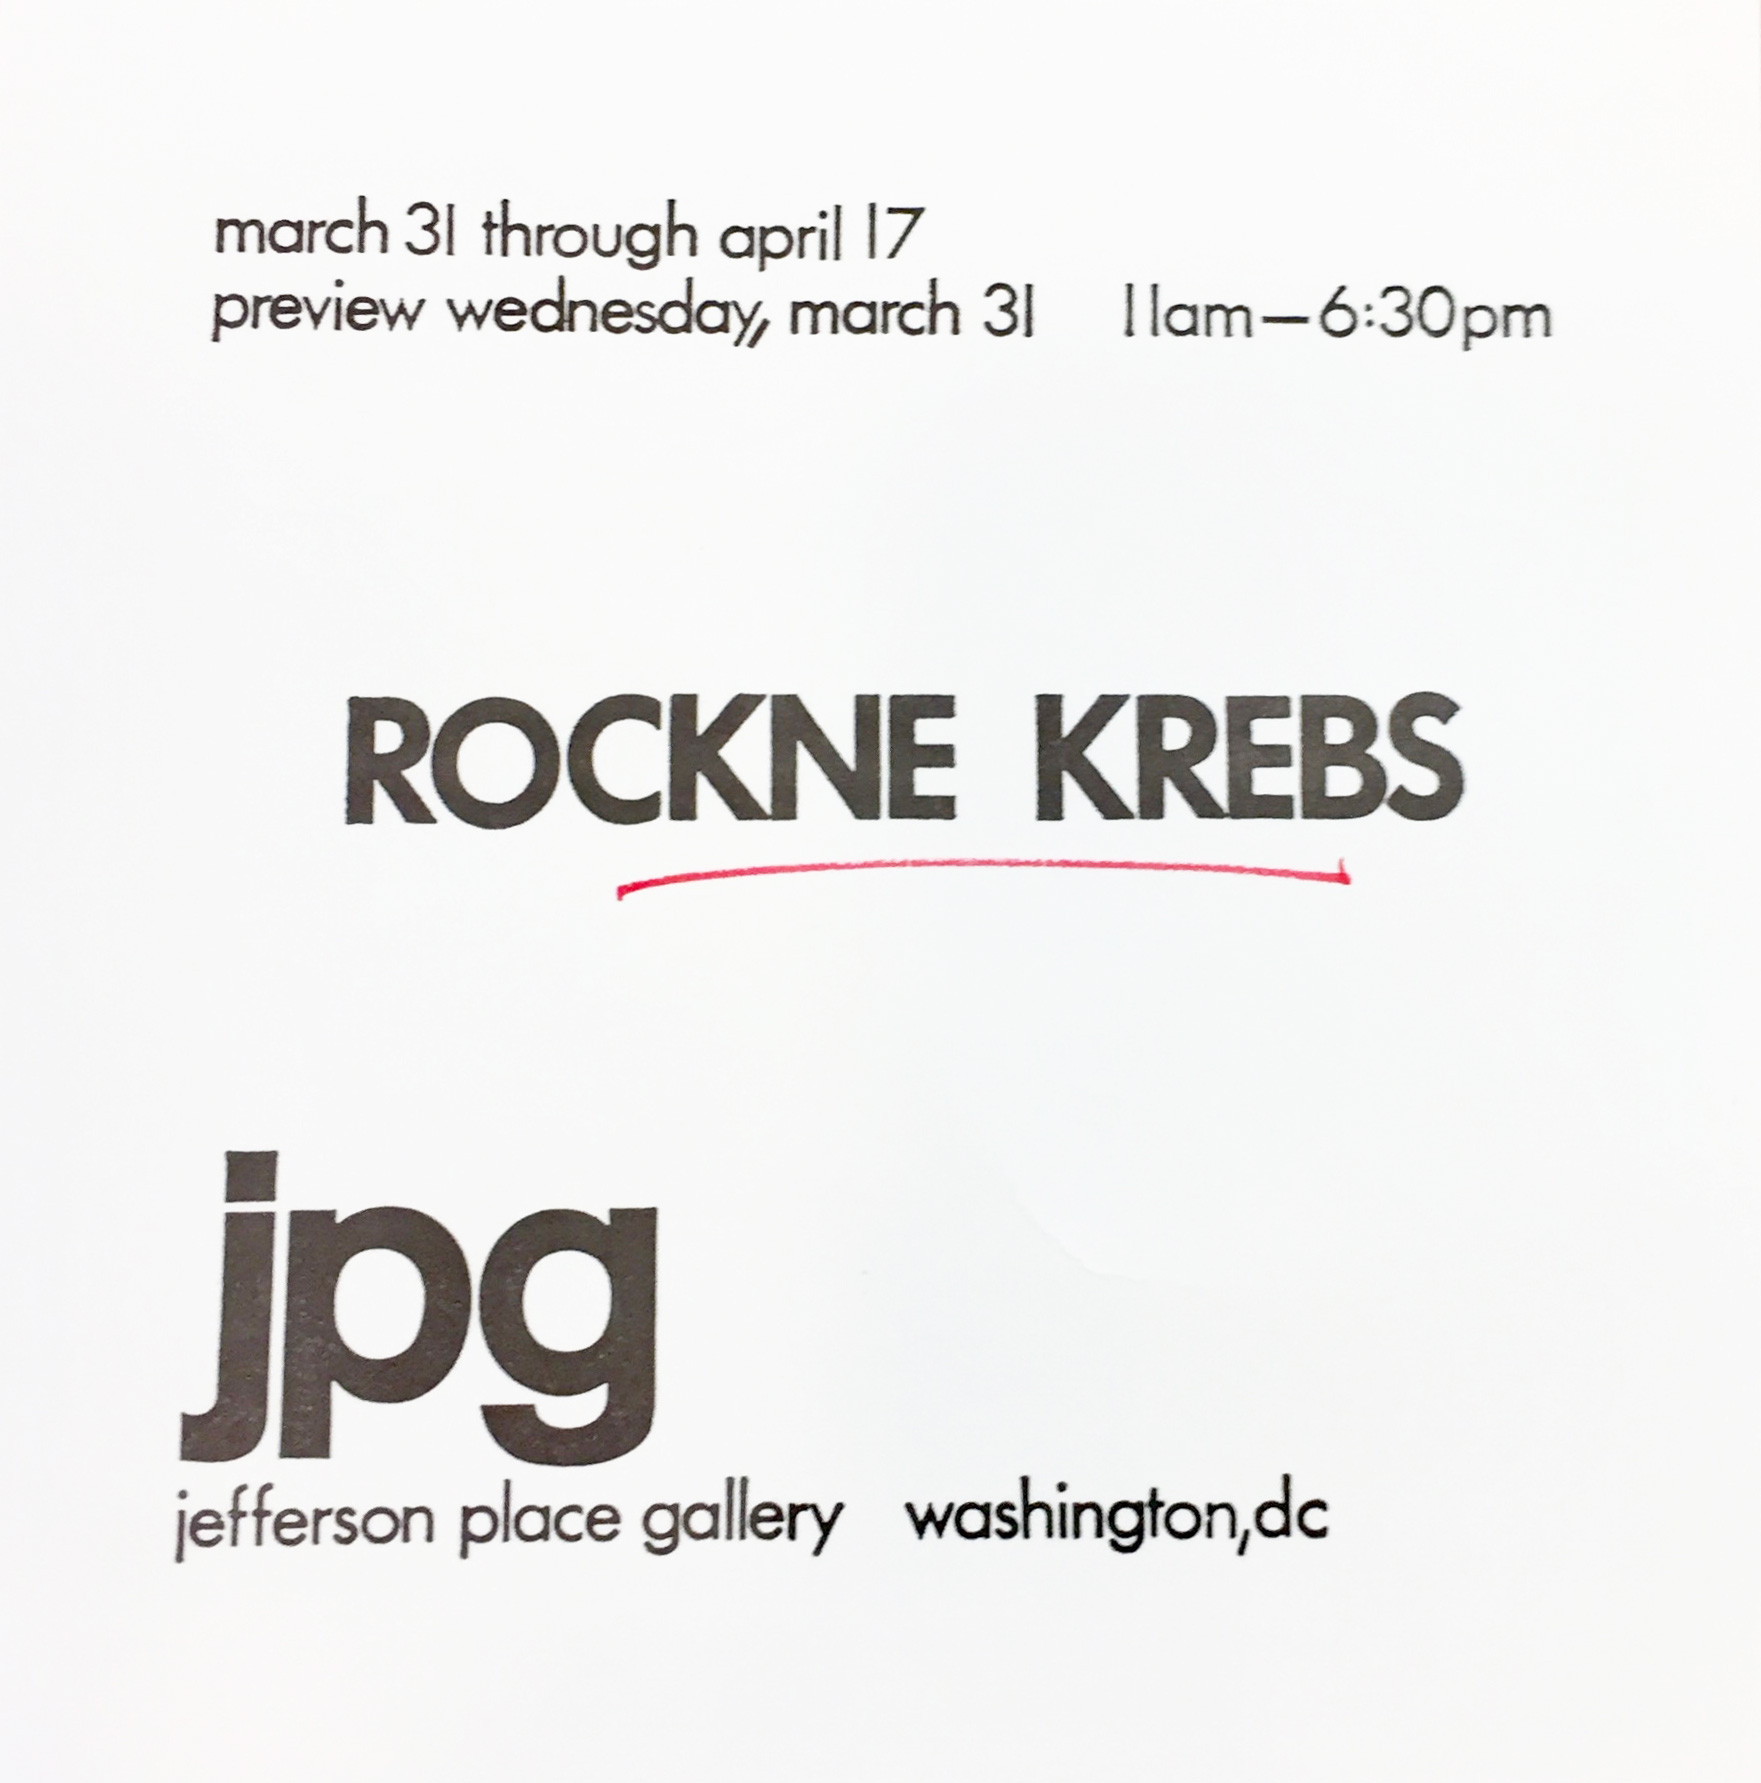 Announcement card for Rockne Krebs at Jefferson Place Gallery